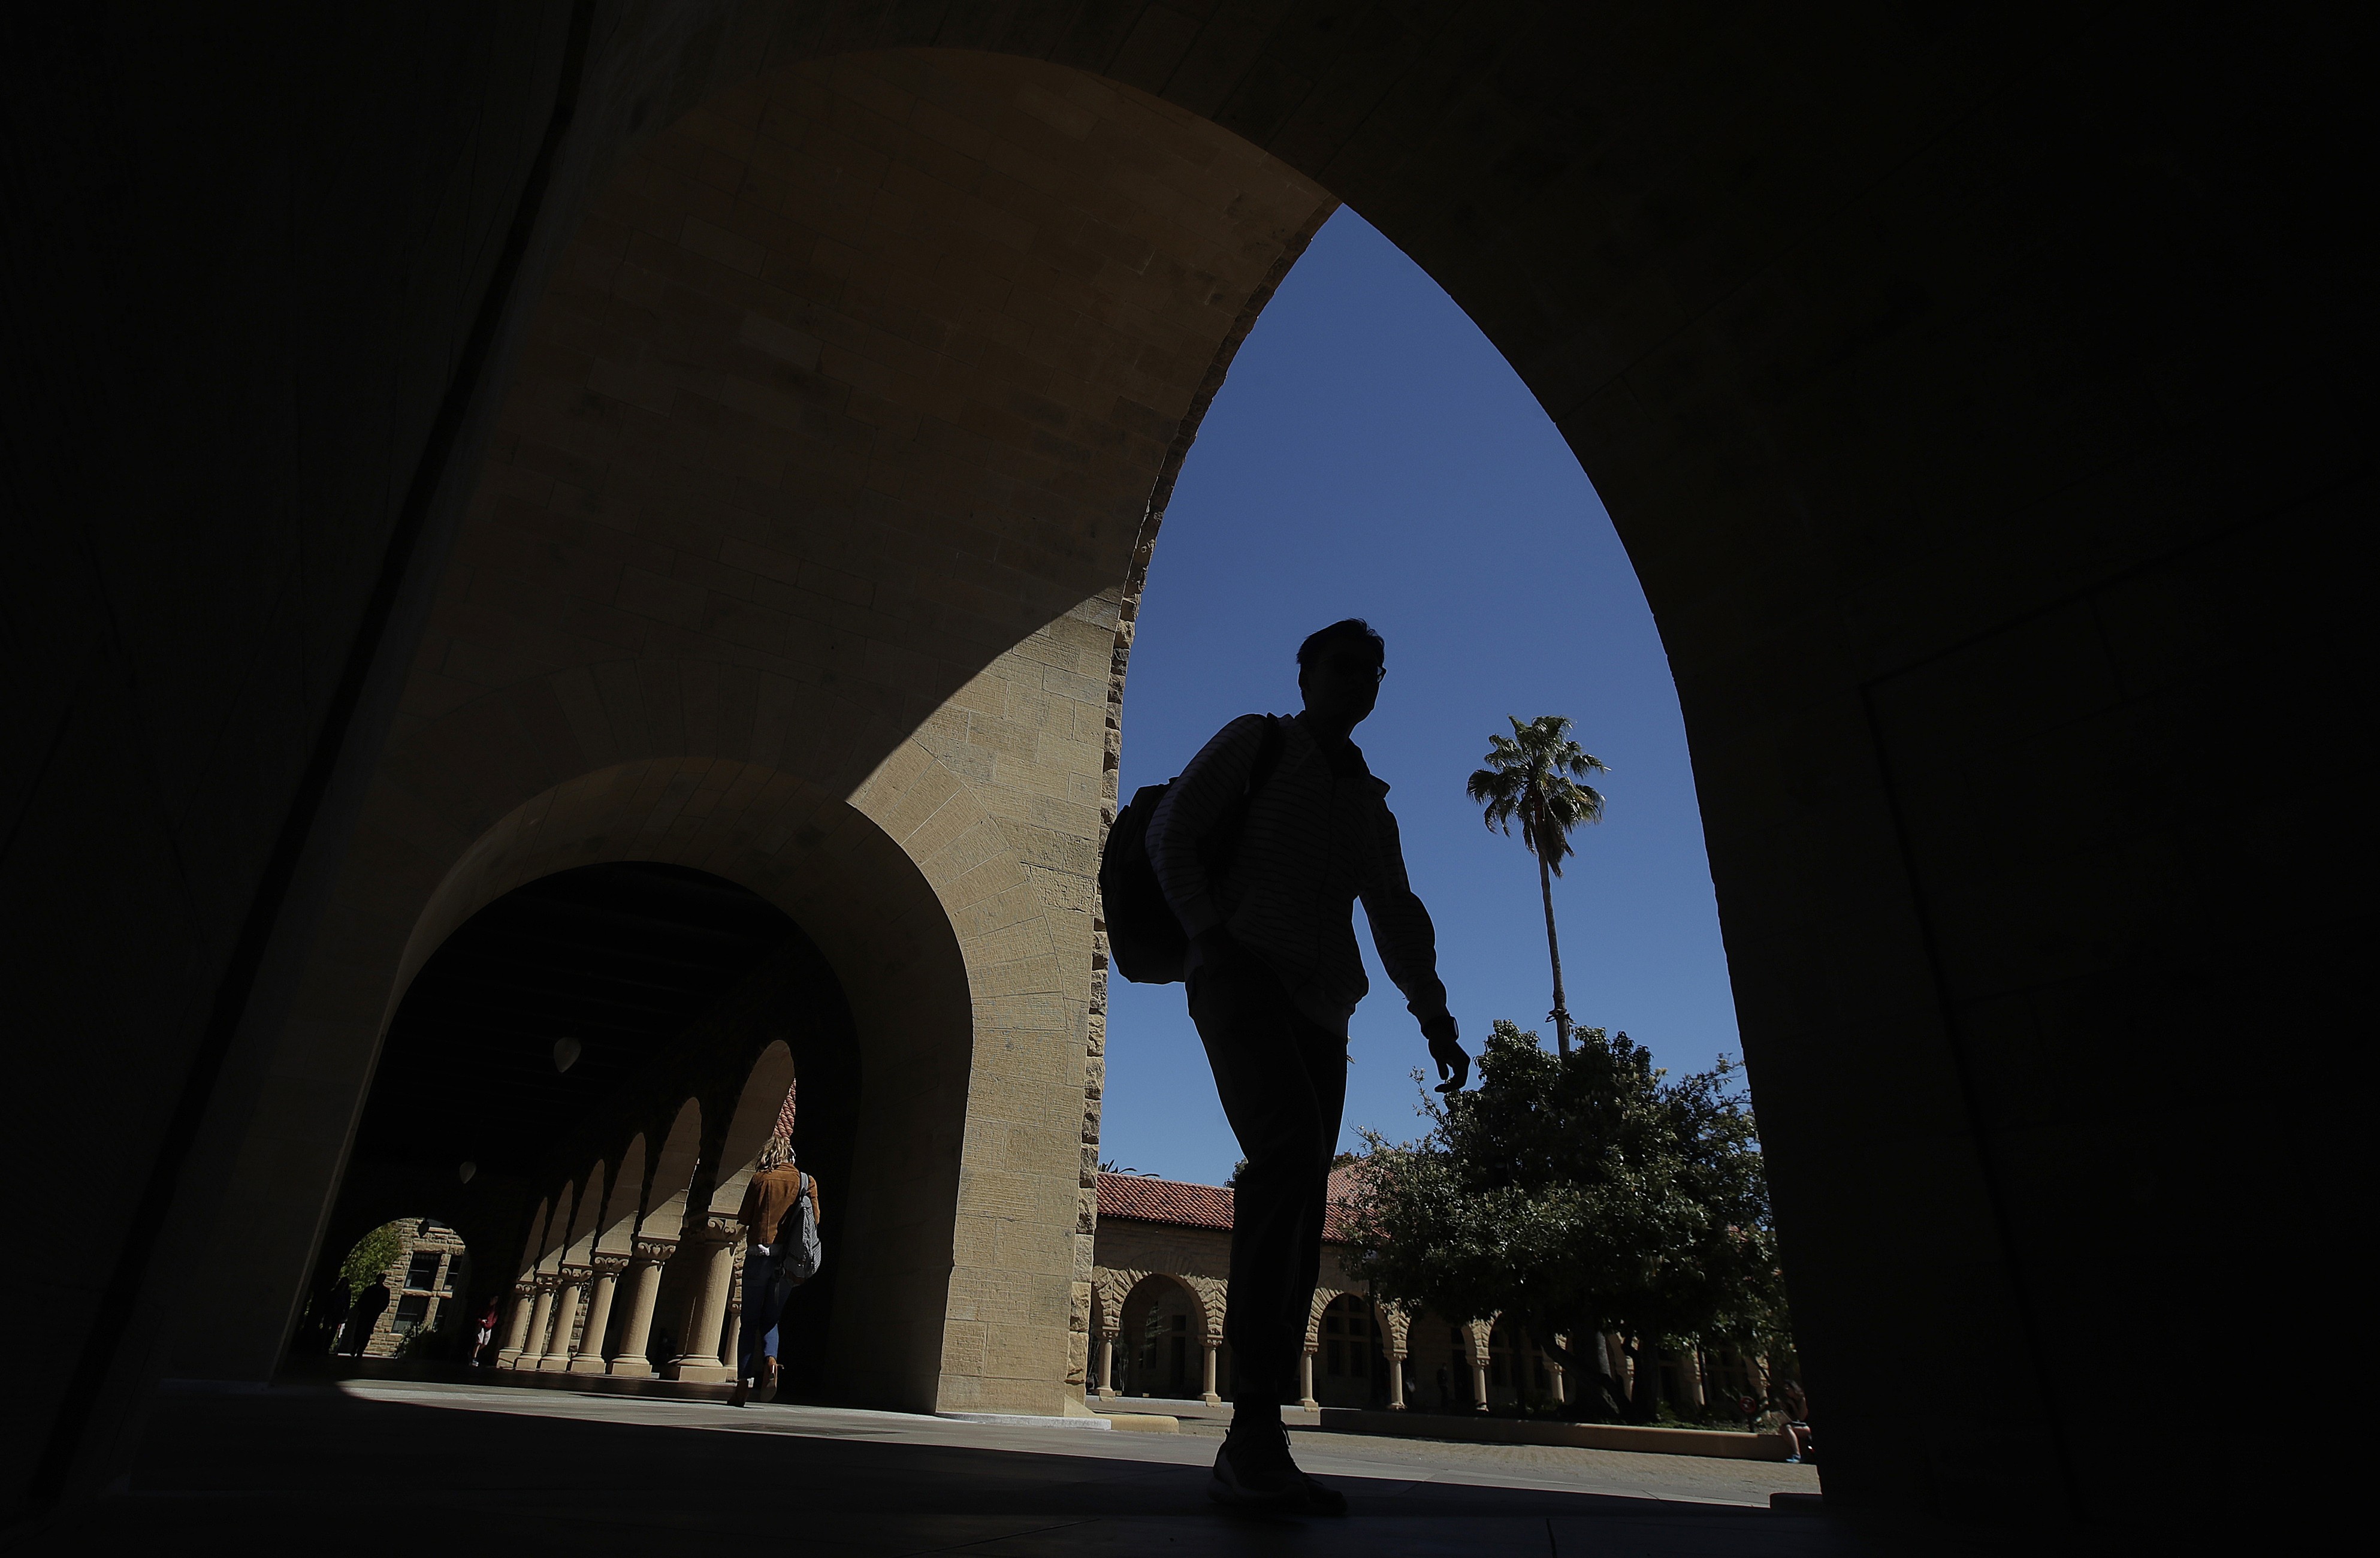 Stanford University, in Palo Alto, California, is one of the institutions where, according to federal prosecutors, cheating and payoffs helped students gain admission. Photo: AP